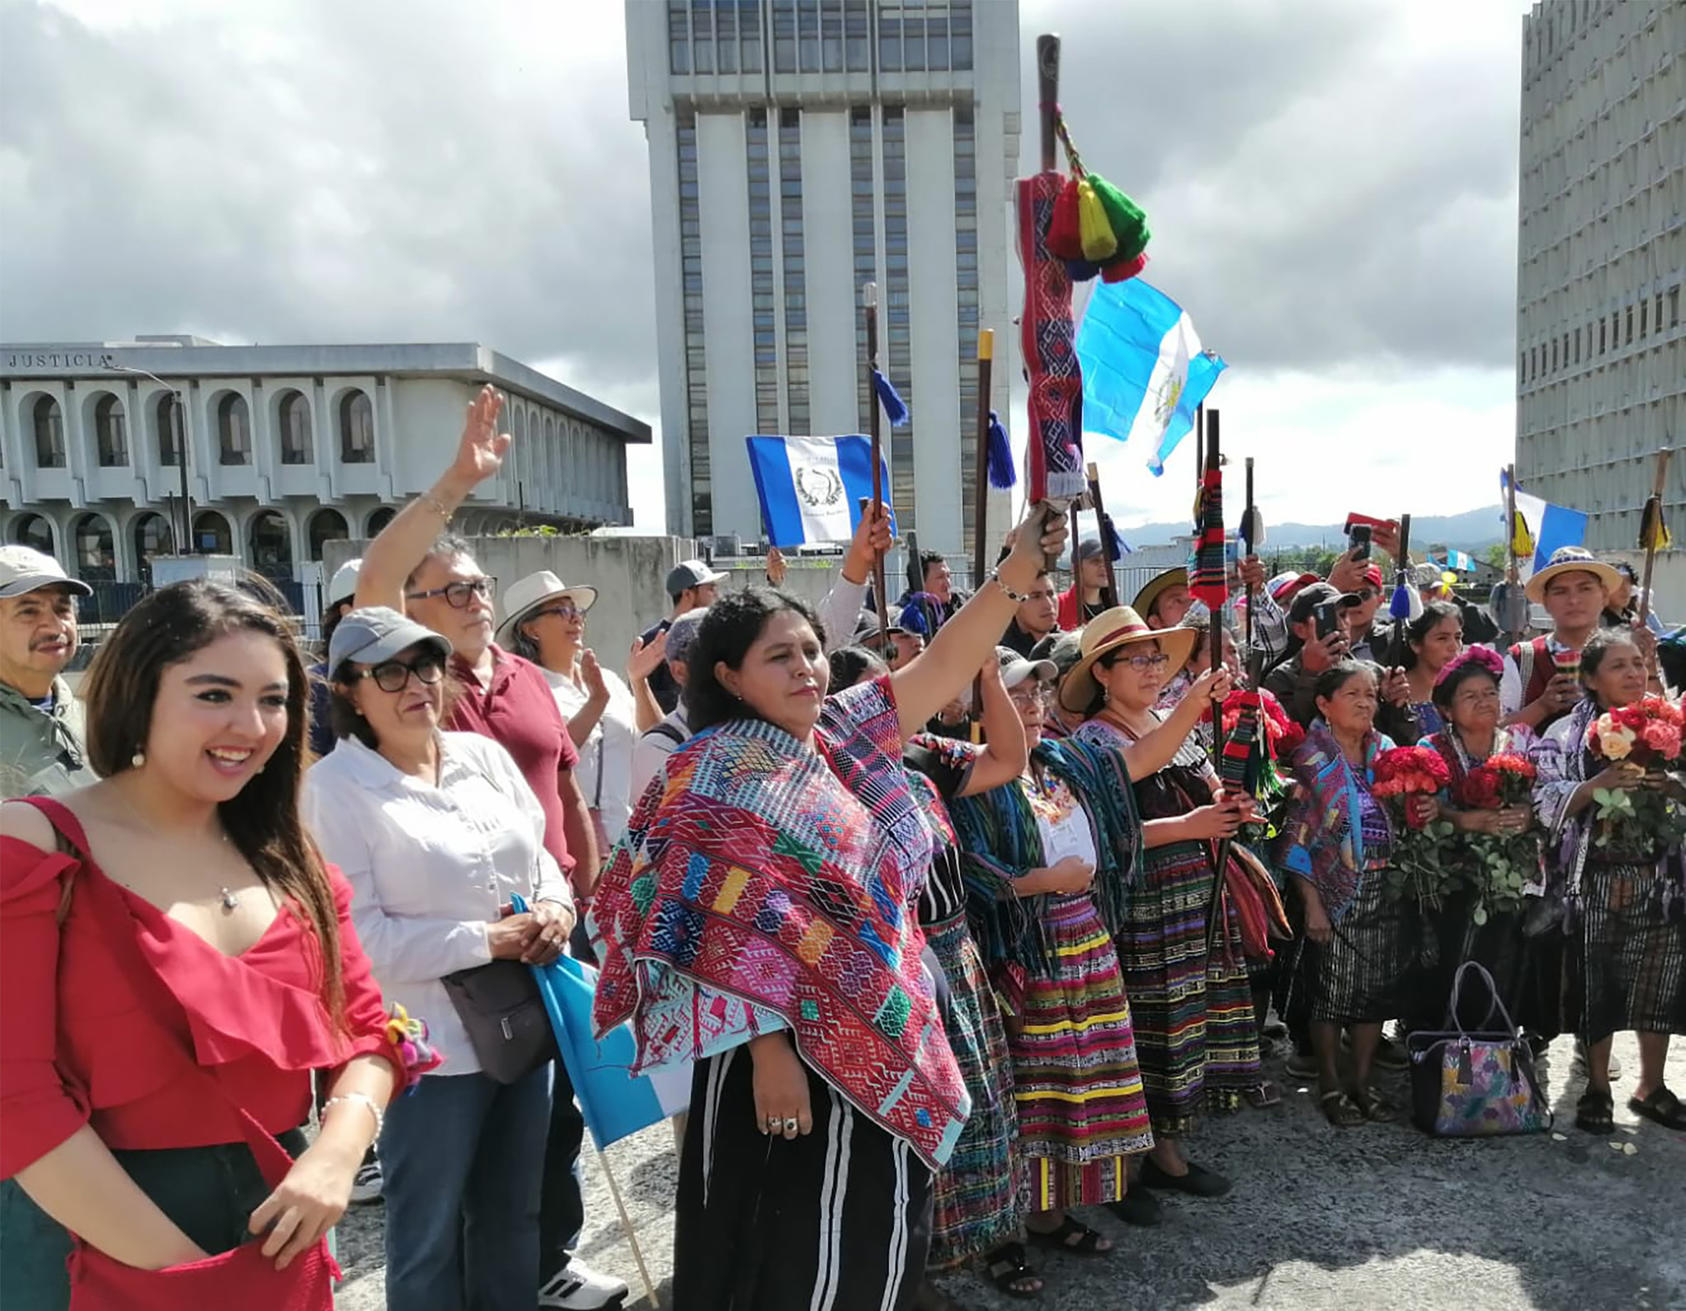 Indigenous Guatemalans in the capital join a commemoration October 20 of the 1944 revolution that briefly ended dictatorship and let voters choose their first democratically elected president, Juan José Arévalo. His son is now Guatemala’s president-elect.